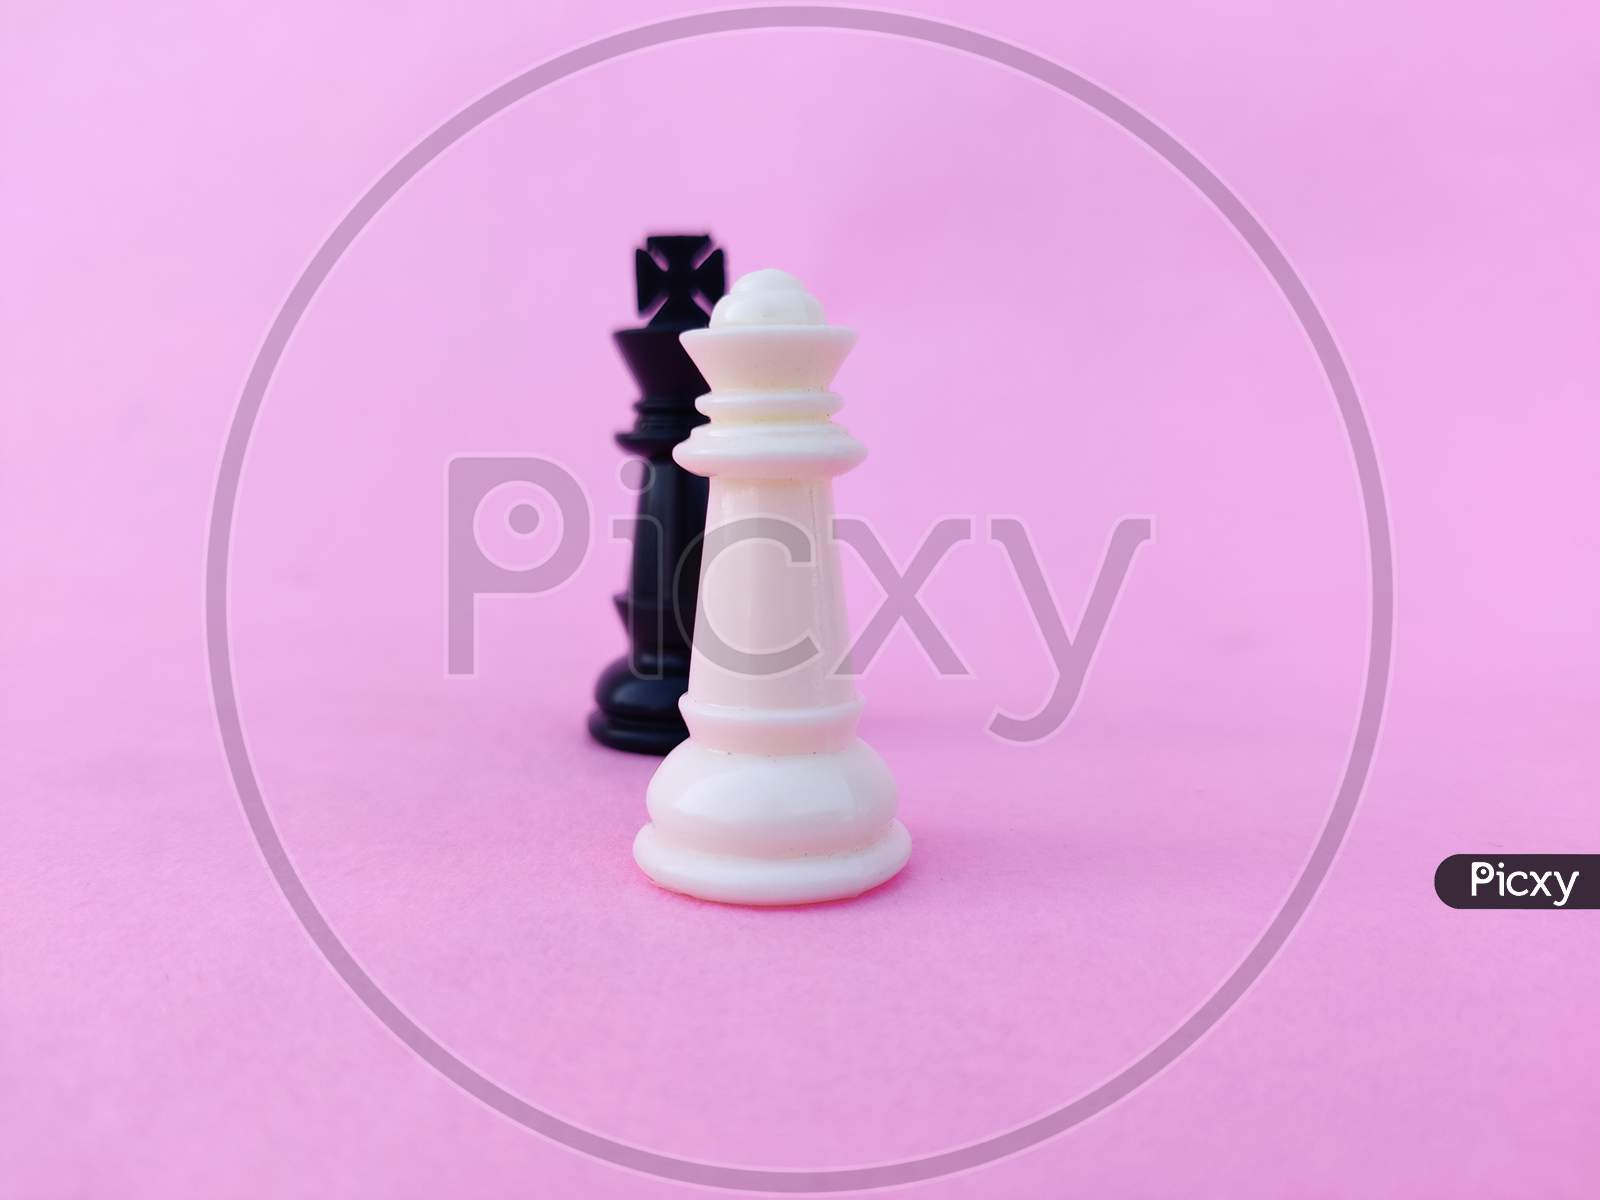 White Chess Queen And Black Chess King Facing Each Other. Isolated On Pink Background